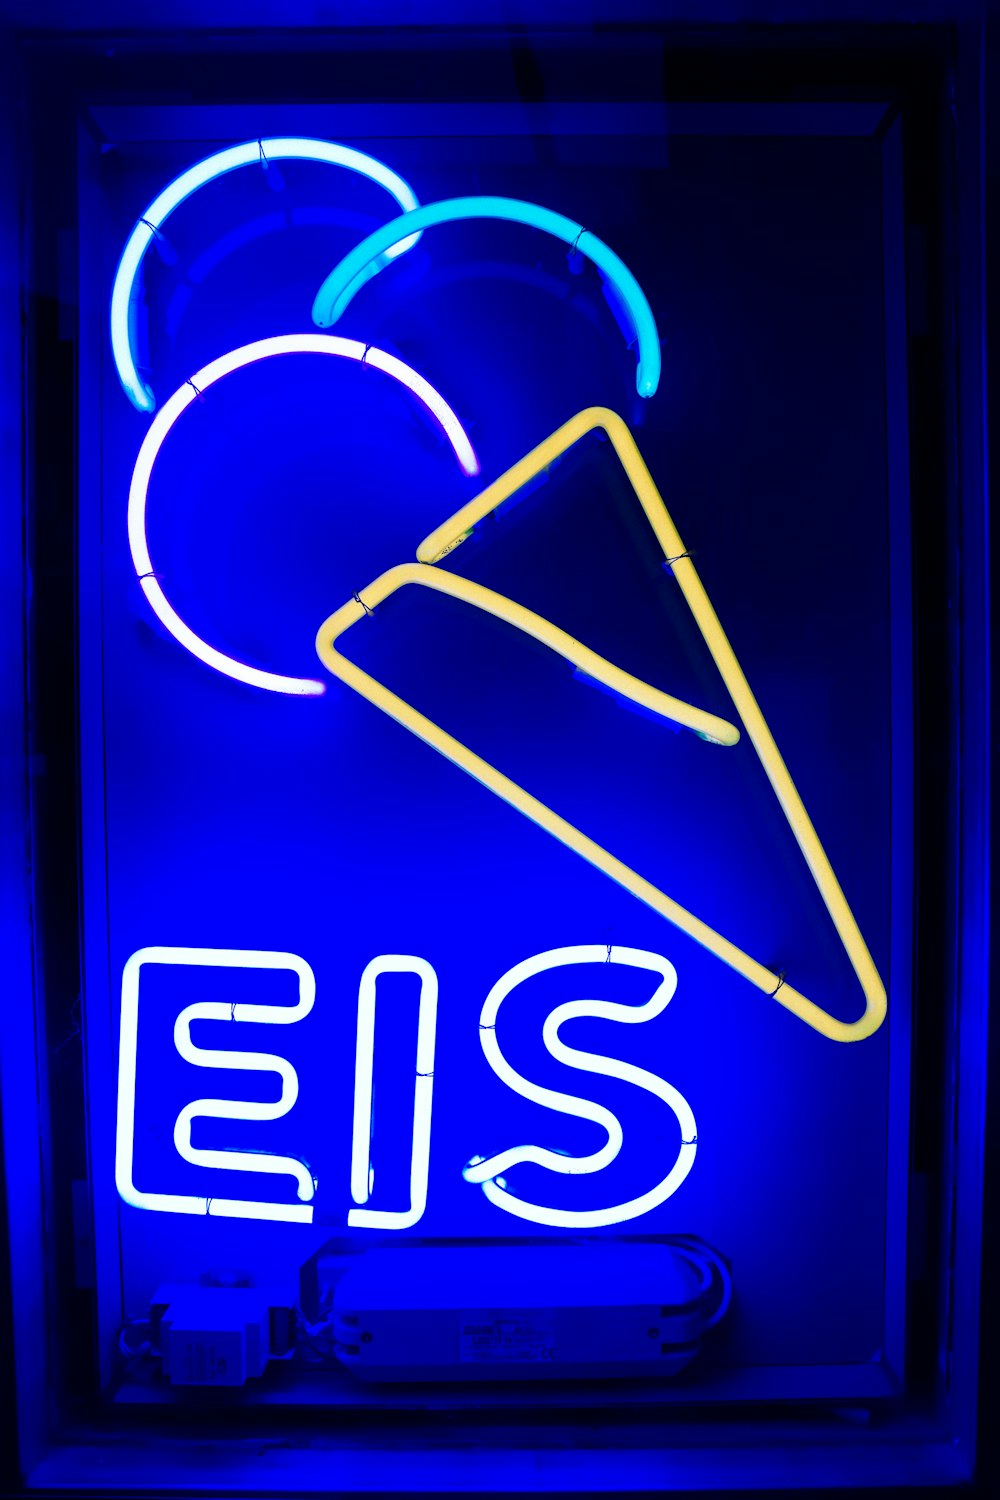 blue and yellow EIS LED light